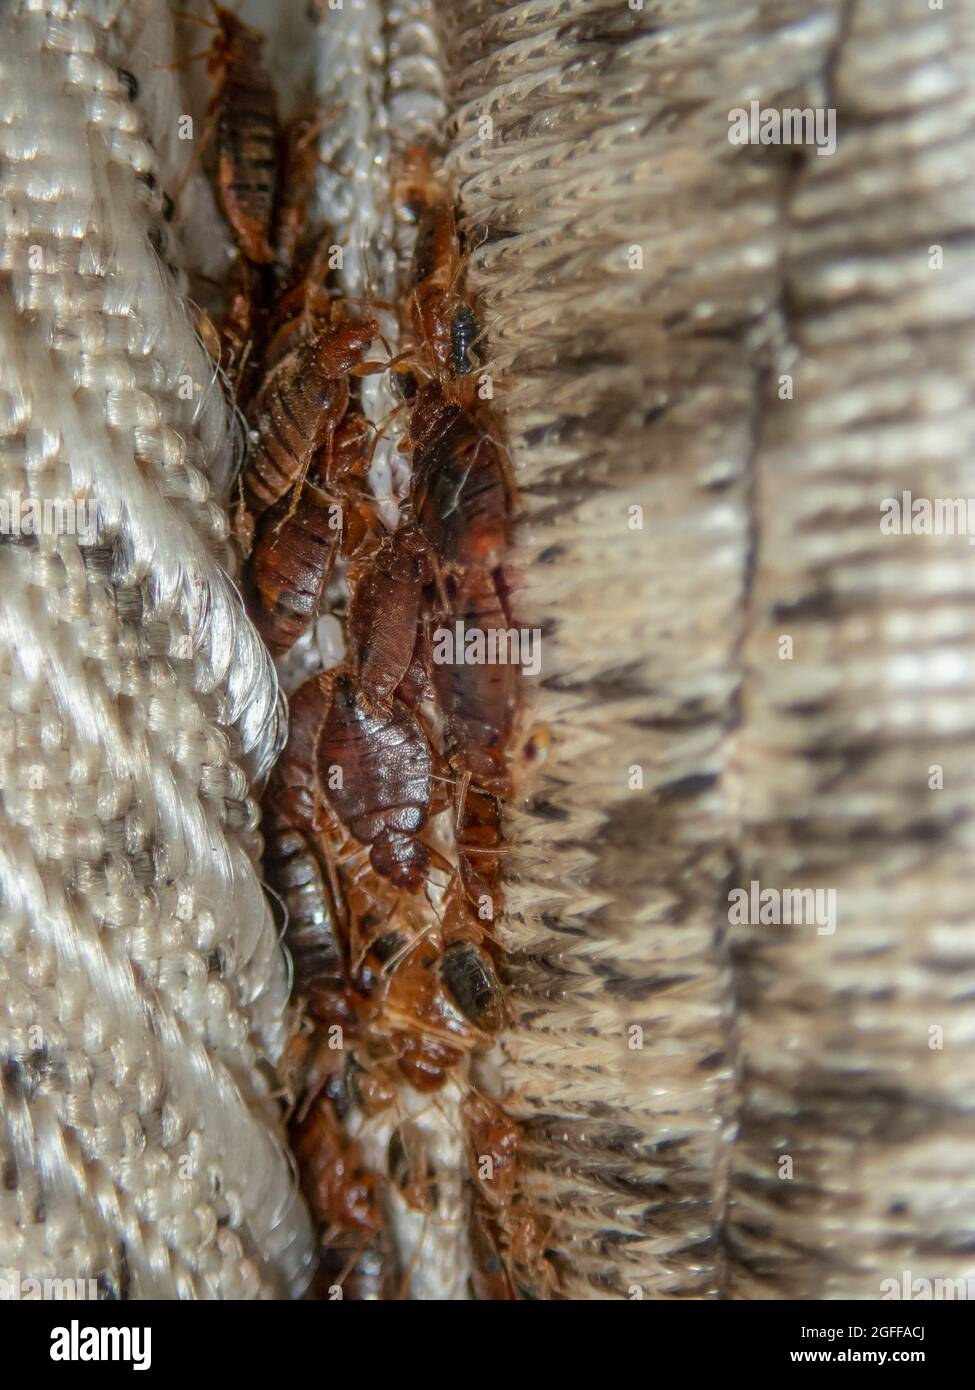 Serious bed bug infestation, bed bugs developed unnoticed on the mattress  in folds and seams Stock Photo - Alamy